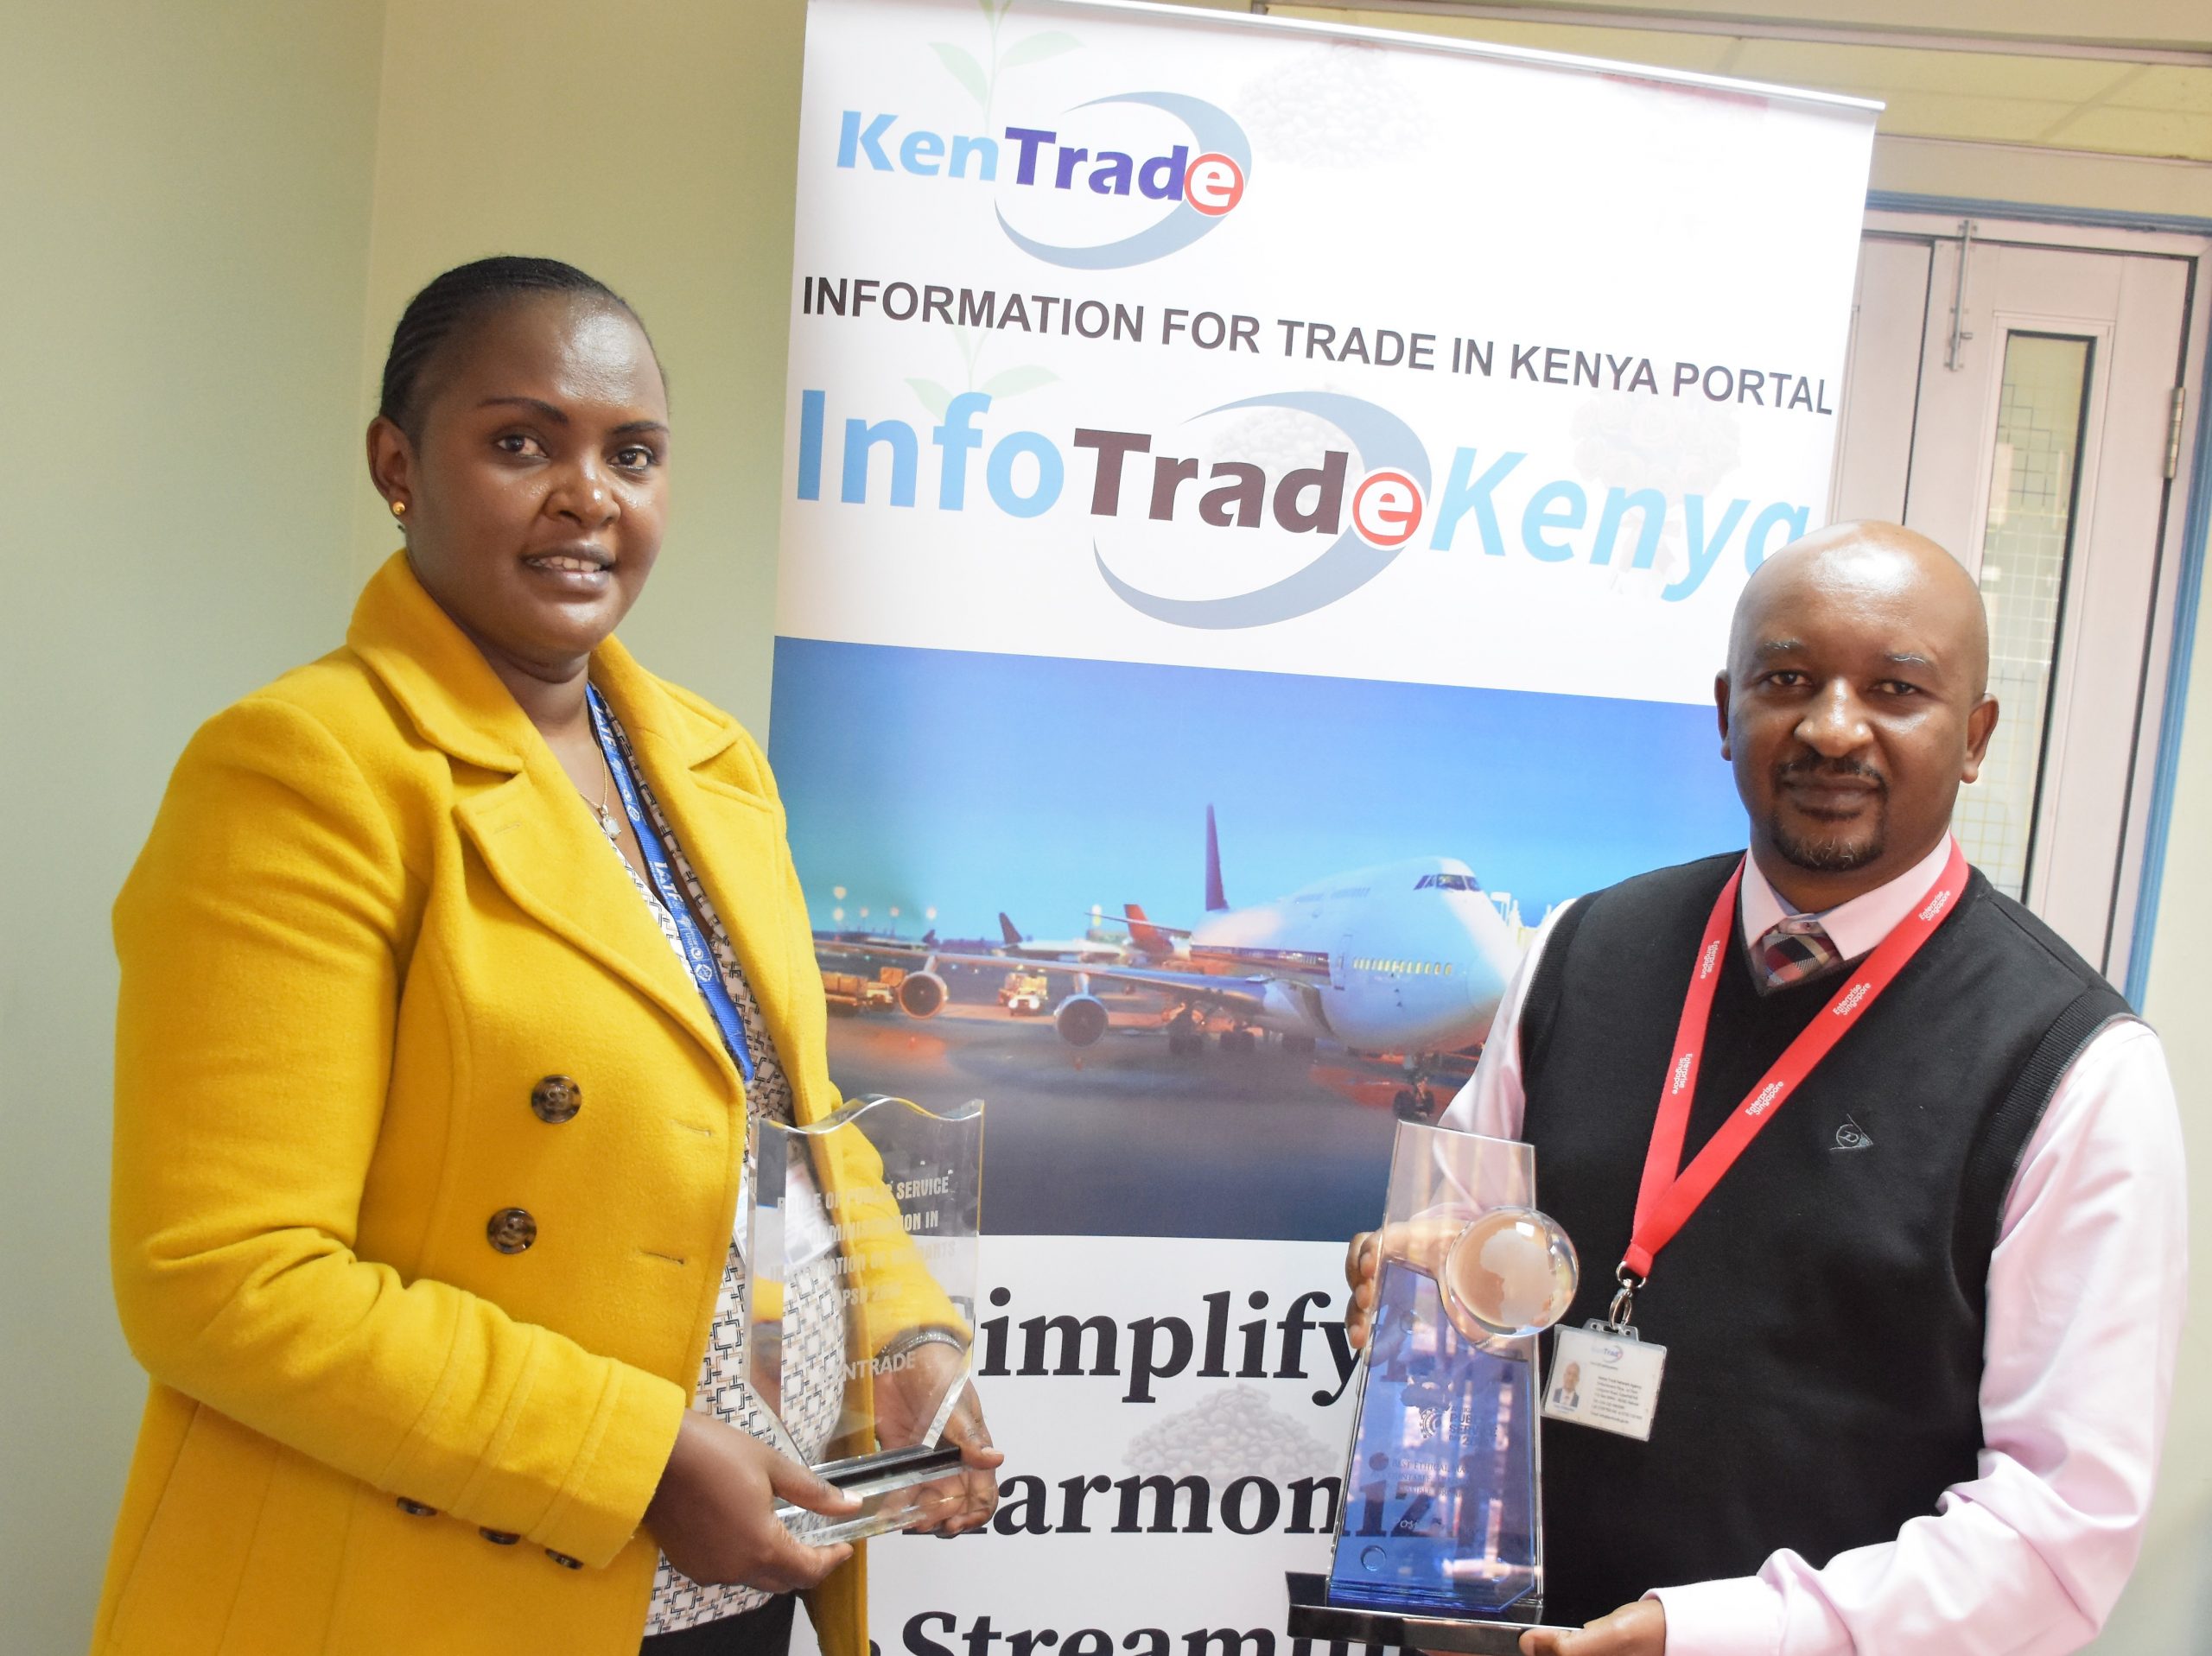 KenTrade named the most transparent organisation during Africa public service day award